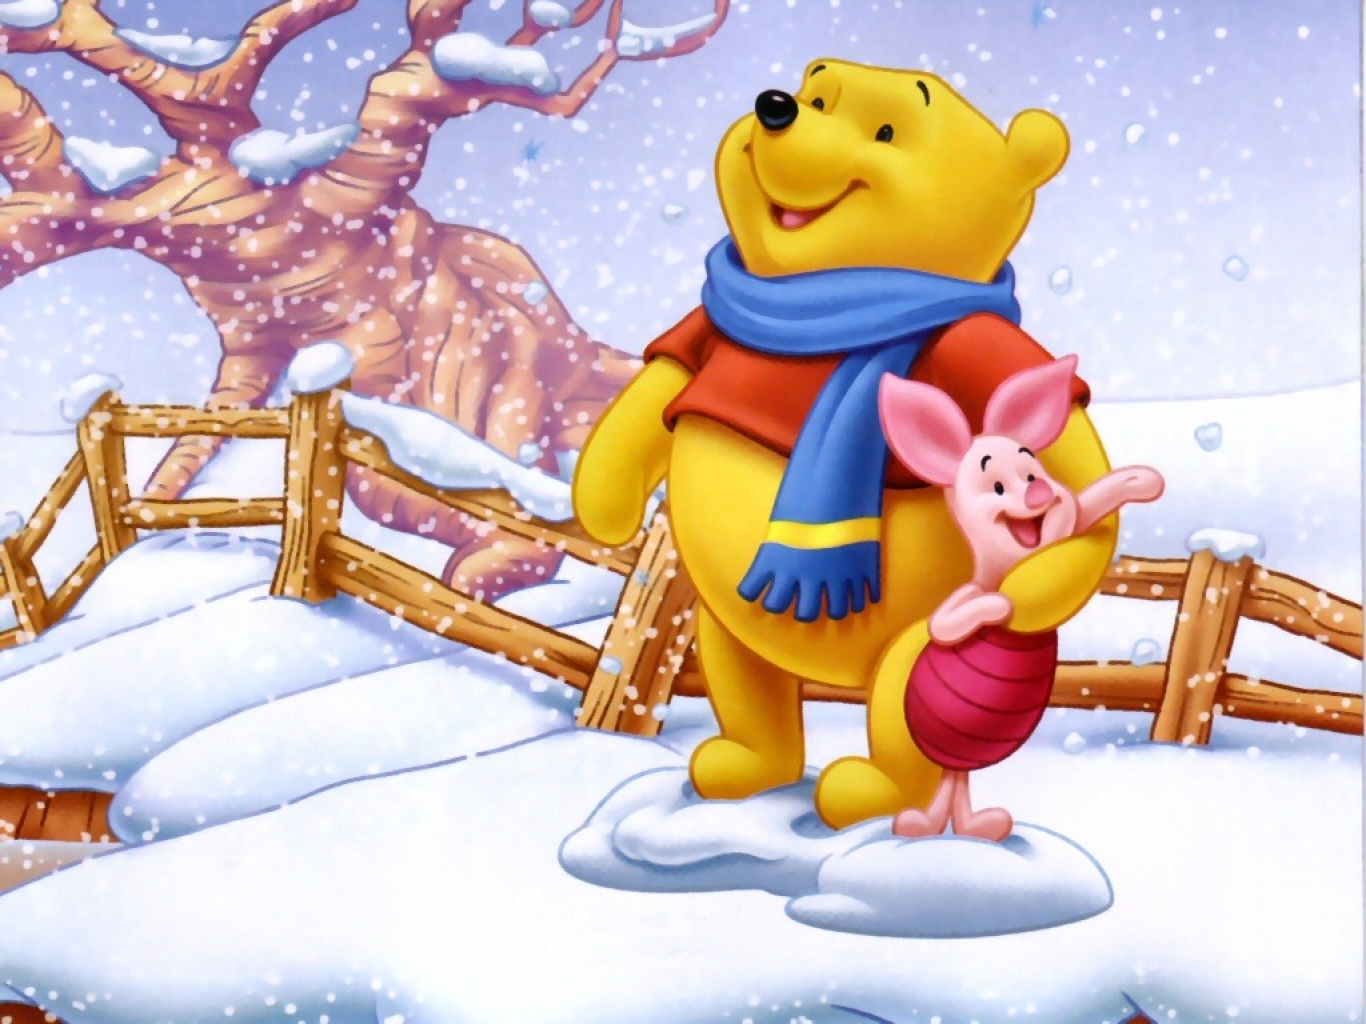 Wallpaper Winnie The Pooh In Snow With His Friend